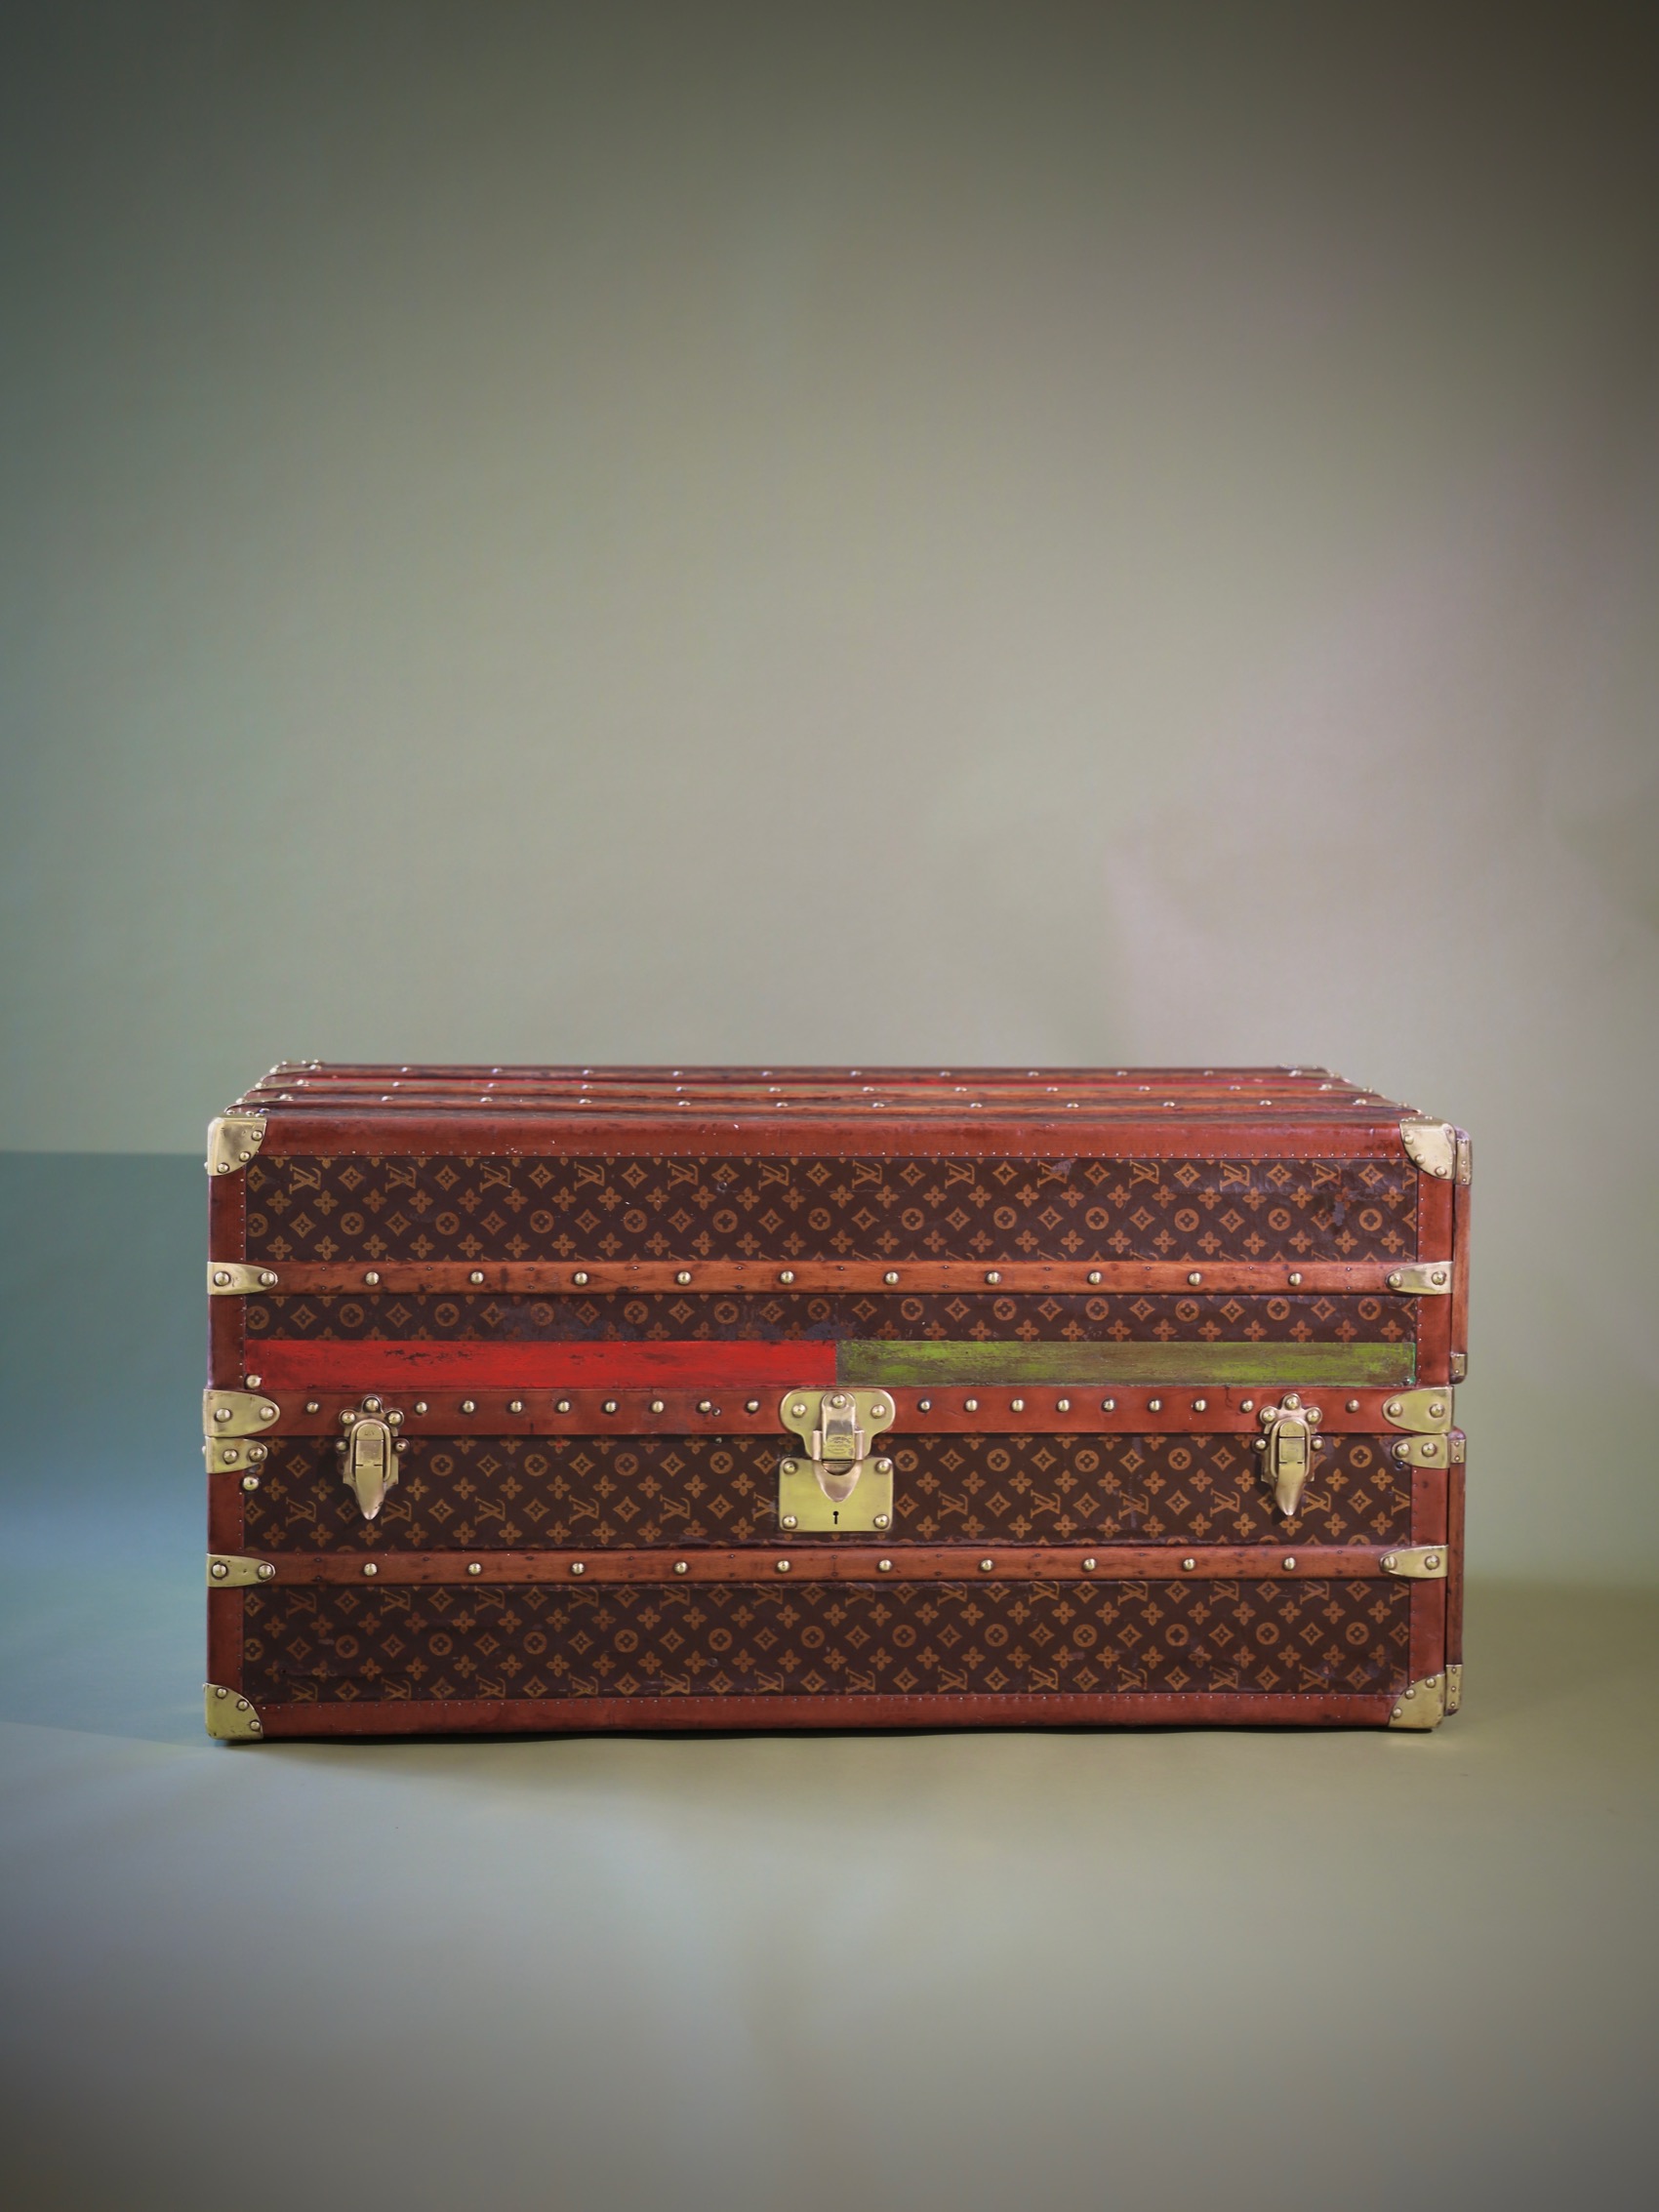 the-well-traveled-trunk-louis-vuitton-thumbnail-product-5754-1